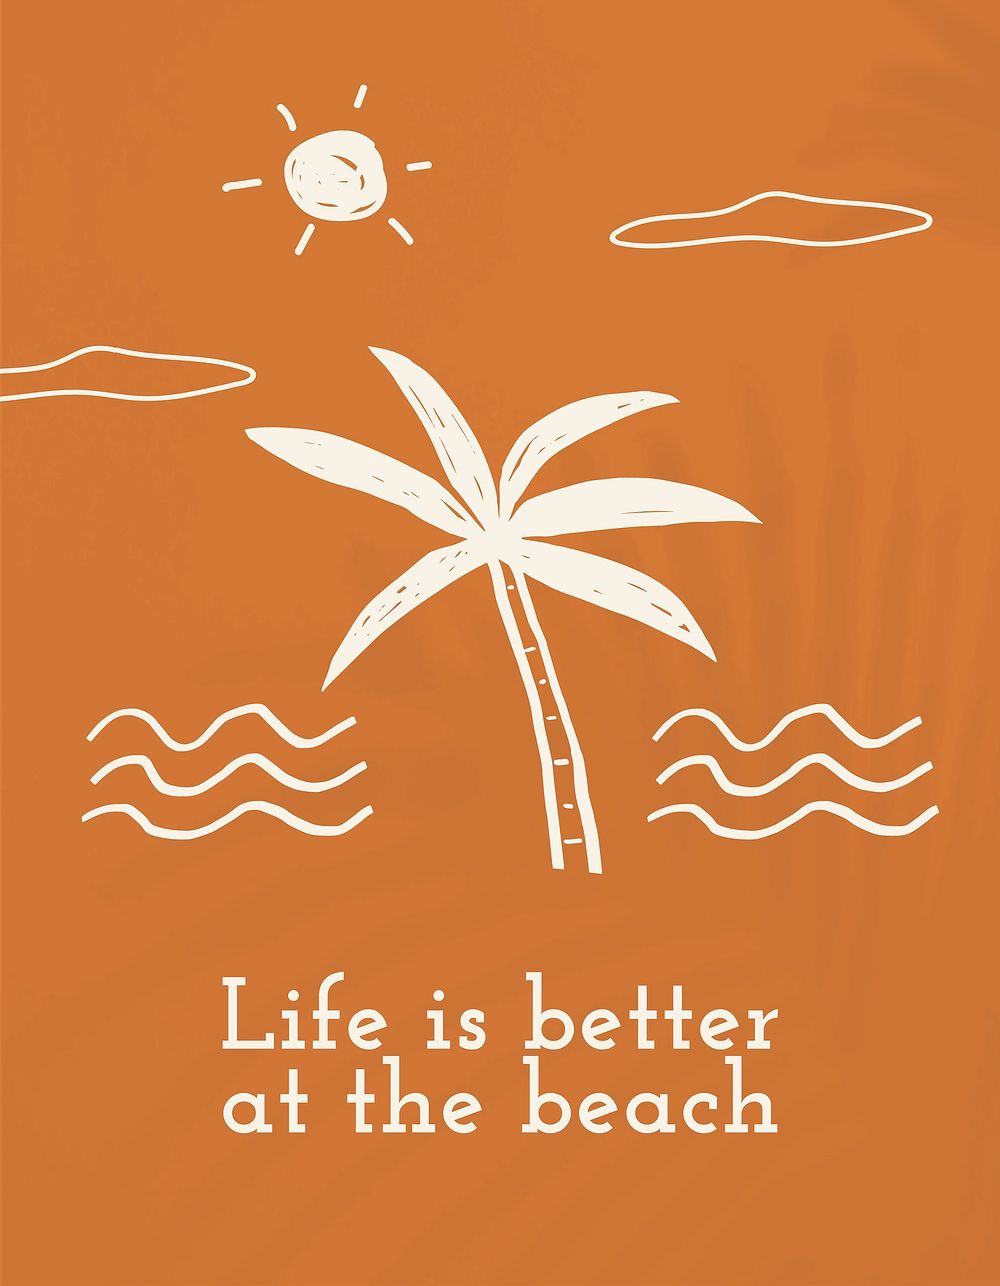 Summer vacation quote with doodle life is better at the beach cute flyer